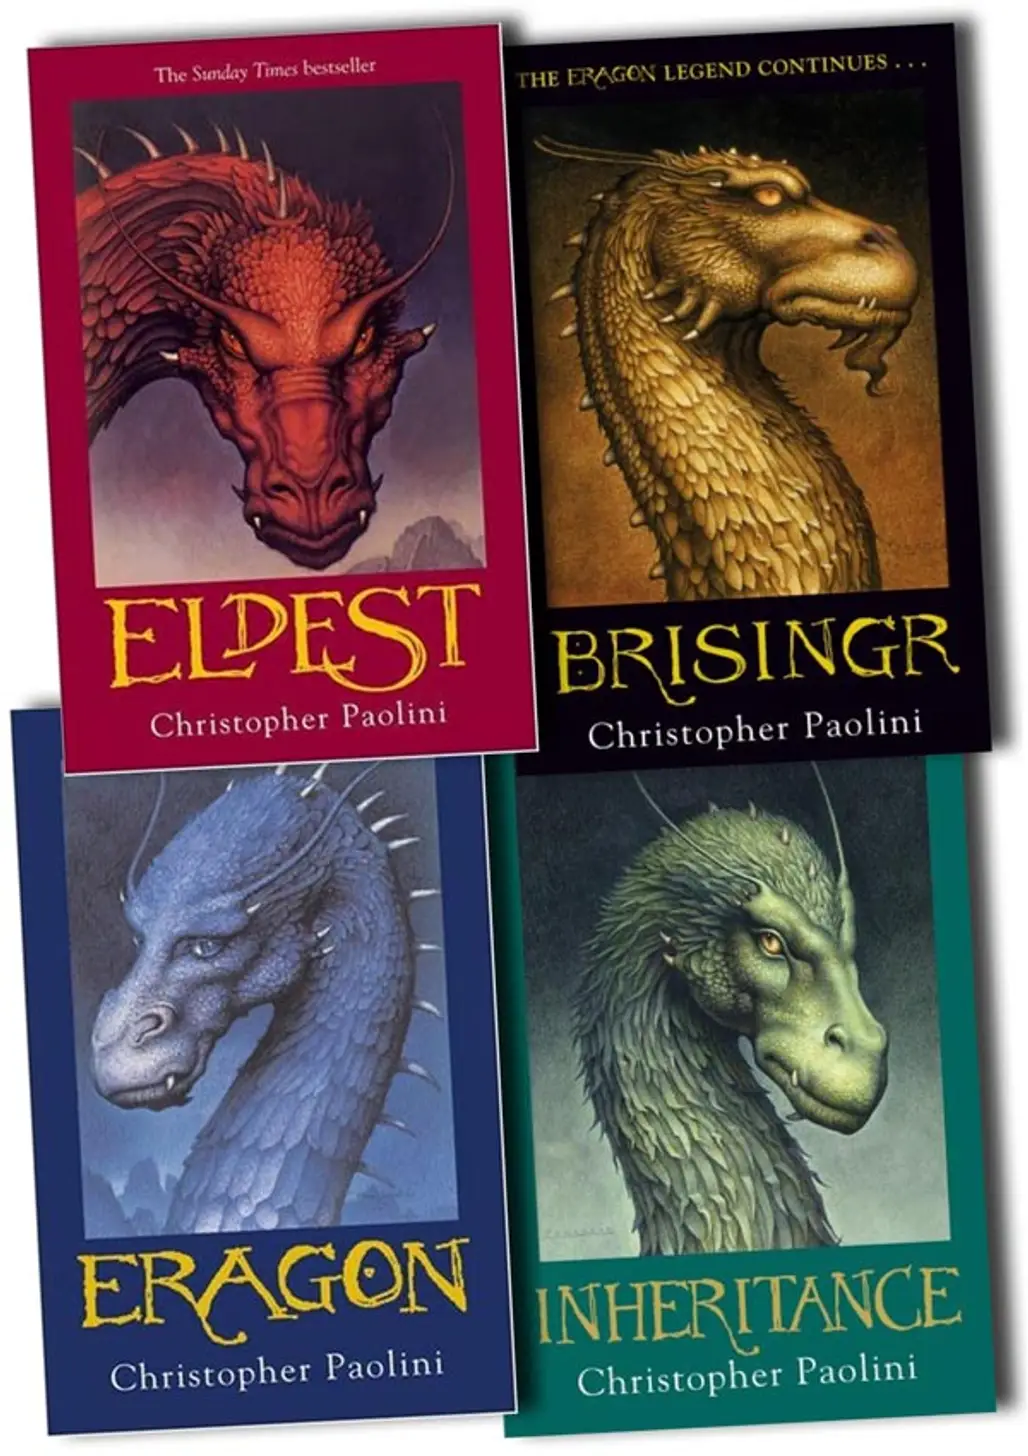 The Inheritance Cycle by Christopher Paolini